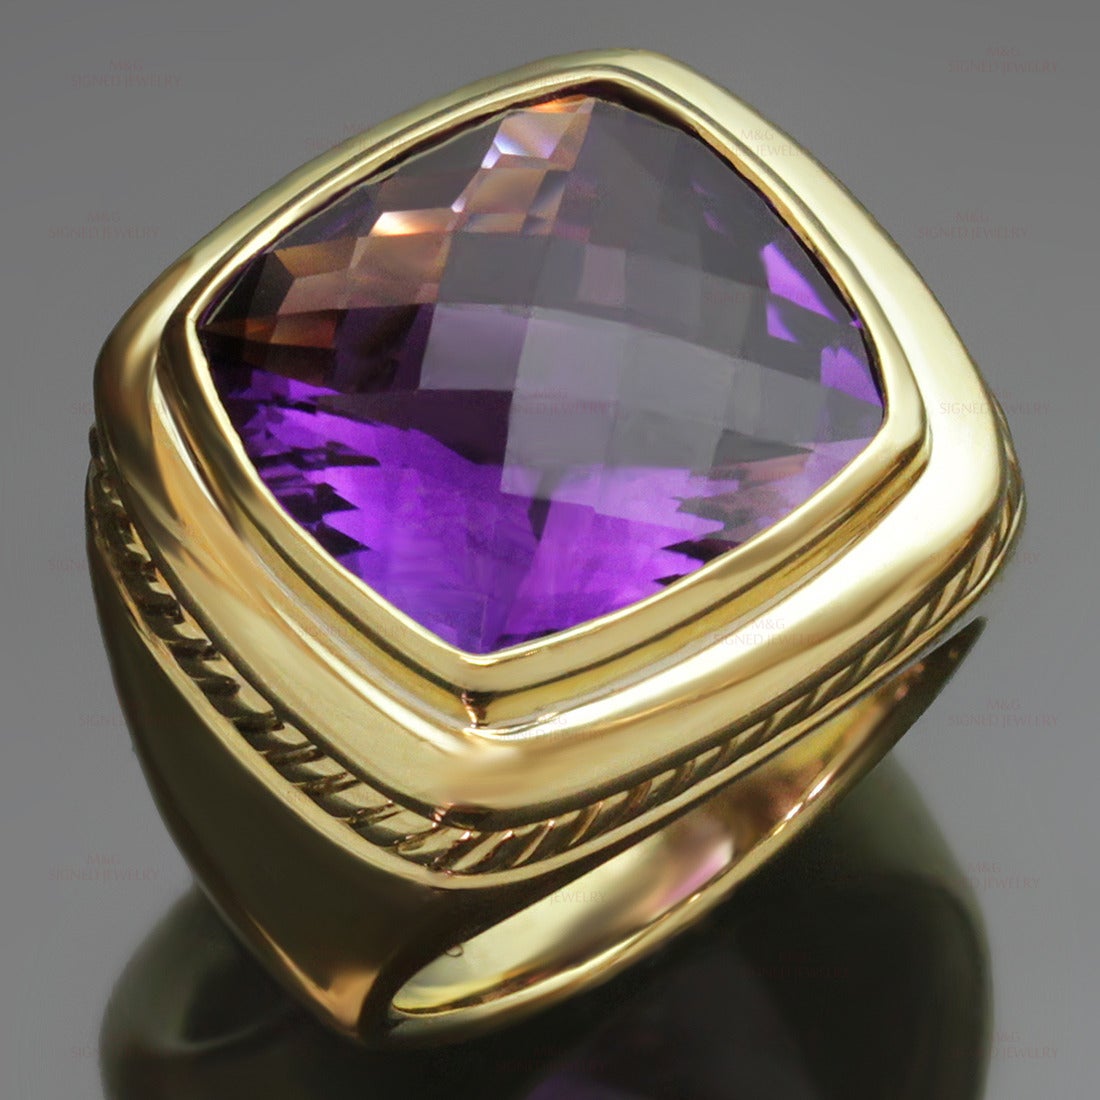 This modern cocktail ring from David Yurman's Albion collection is made in 18k yellow gold and beautifully bezel-set with a faceted 15.0mm amethystone stone. Vibrant and stylish. Measurements: 0.78" (20mm) width. The ring size is 6 - EU 52.